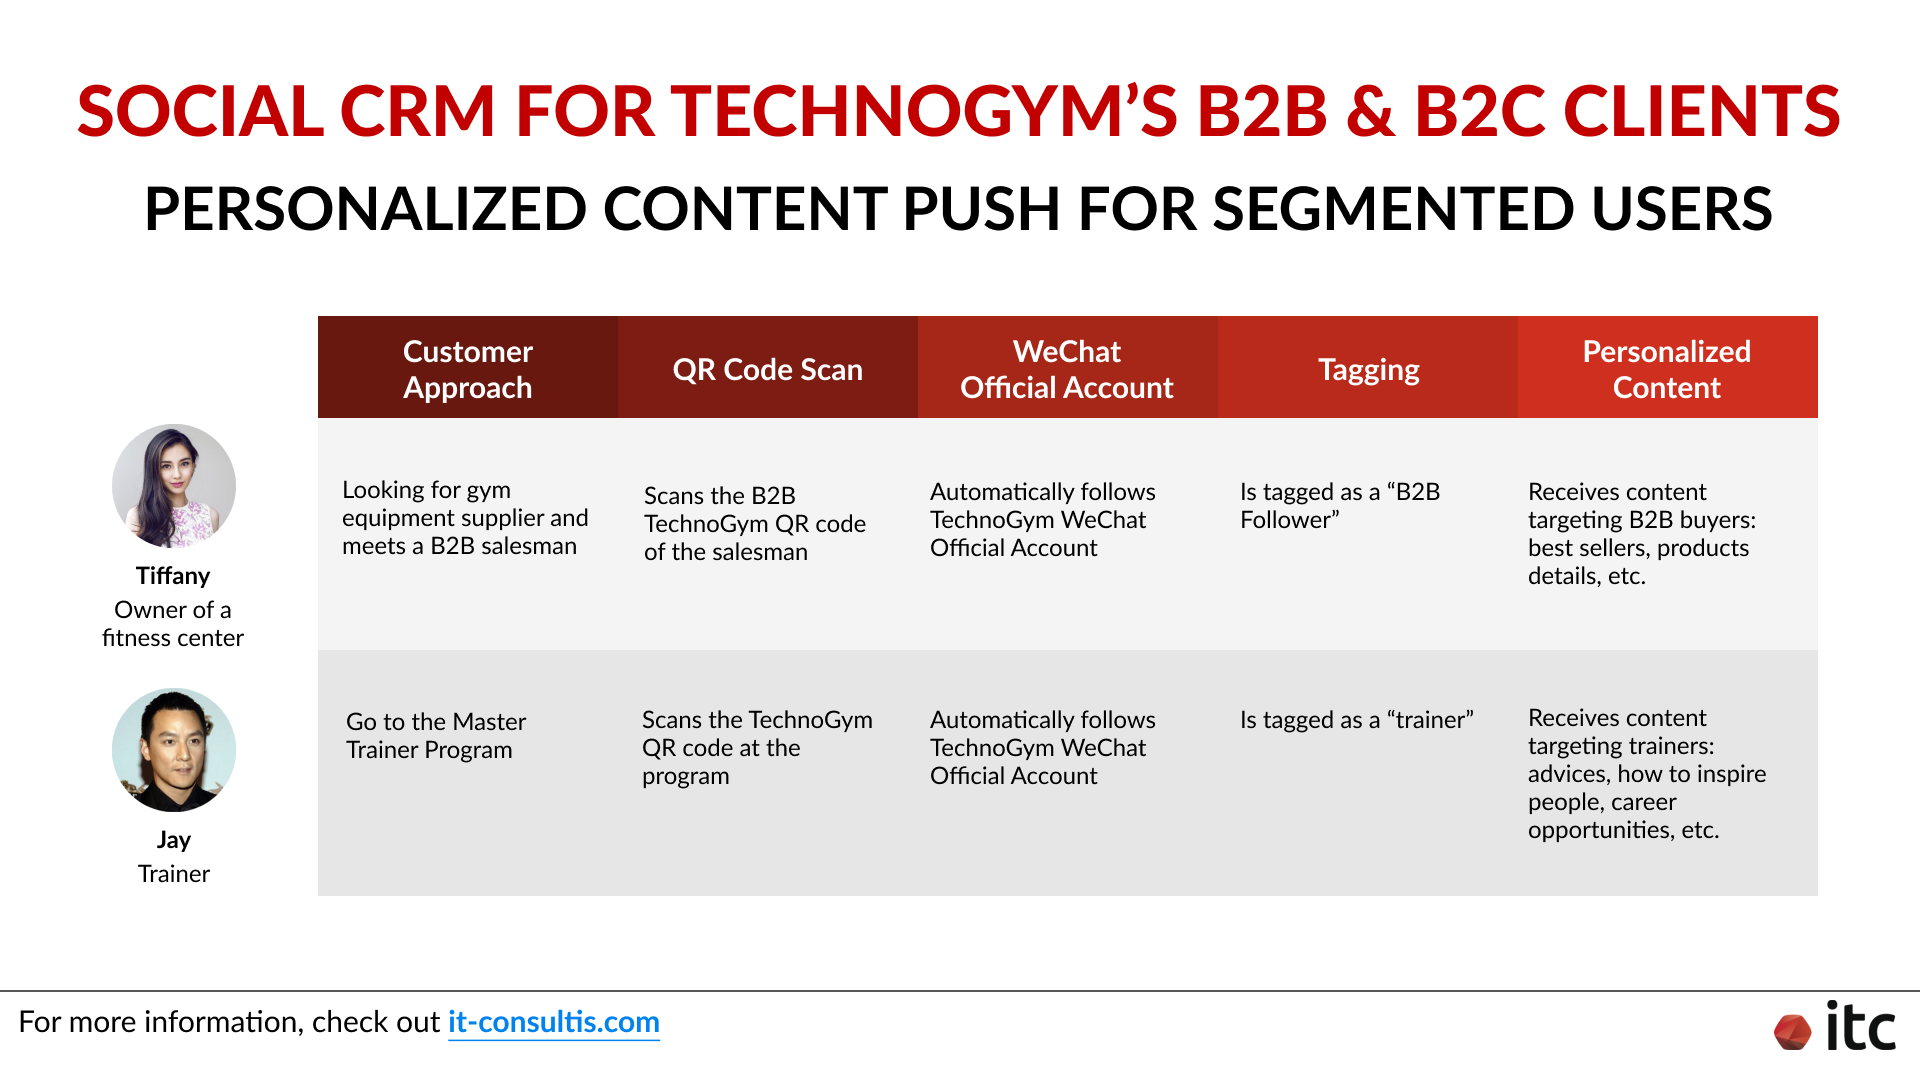 The process of pushing personalized content to TechnoGym's B2B and B2C clients via the Social CRM tool JingSocial